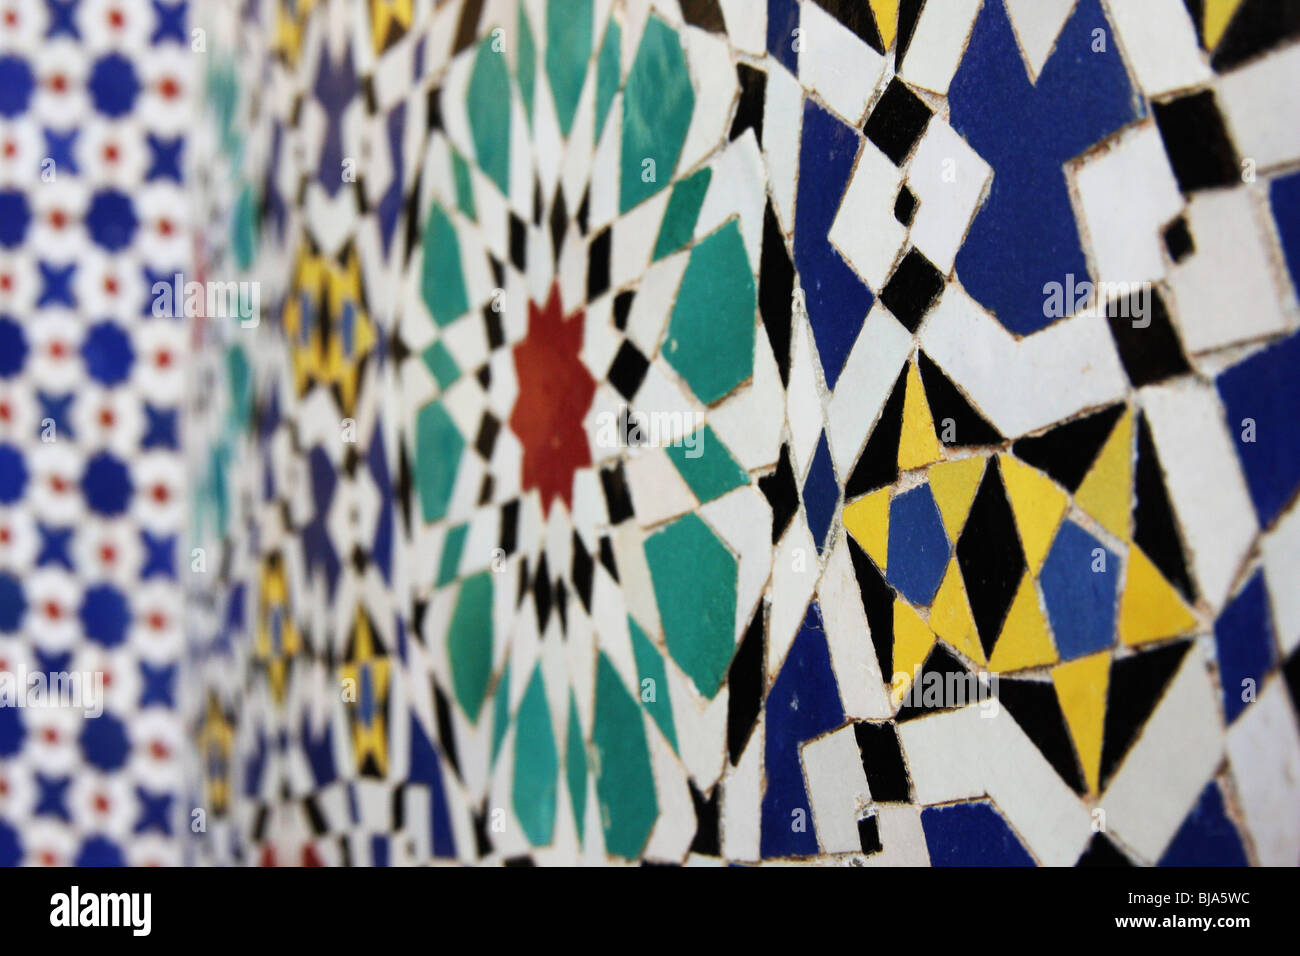 Handmade mosaic tiles on the walls of the Royal Palace, Fez, Morocco Stock Photo